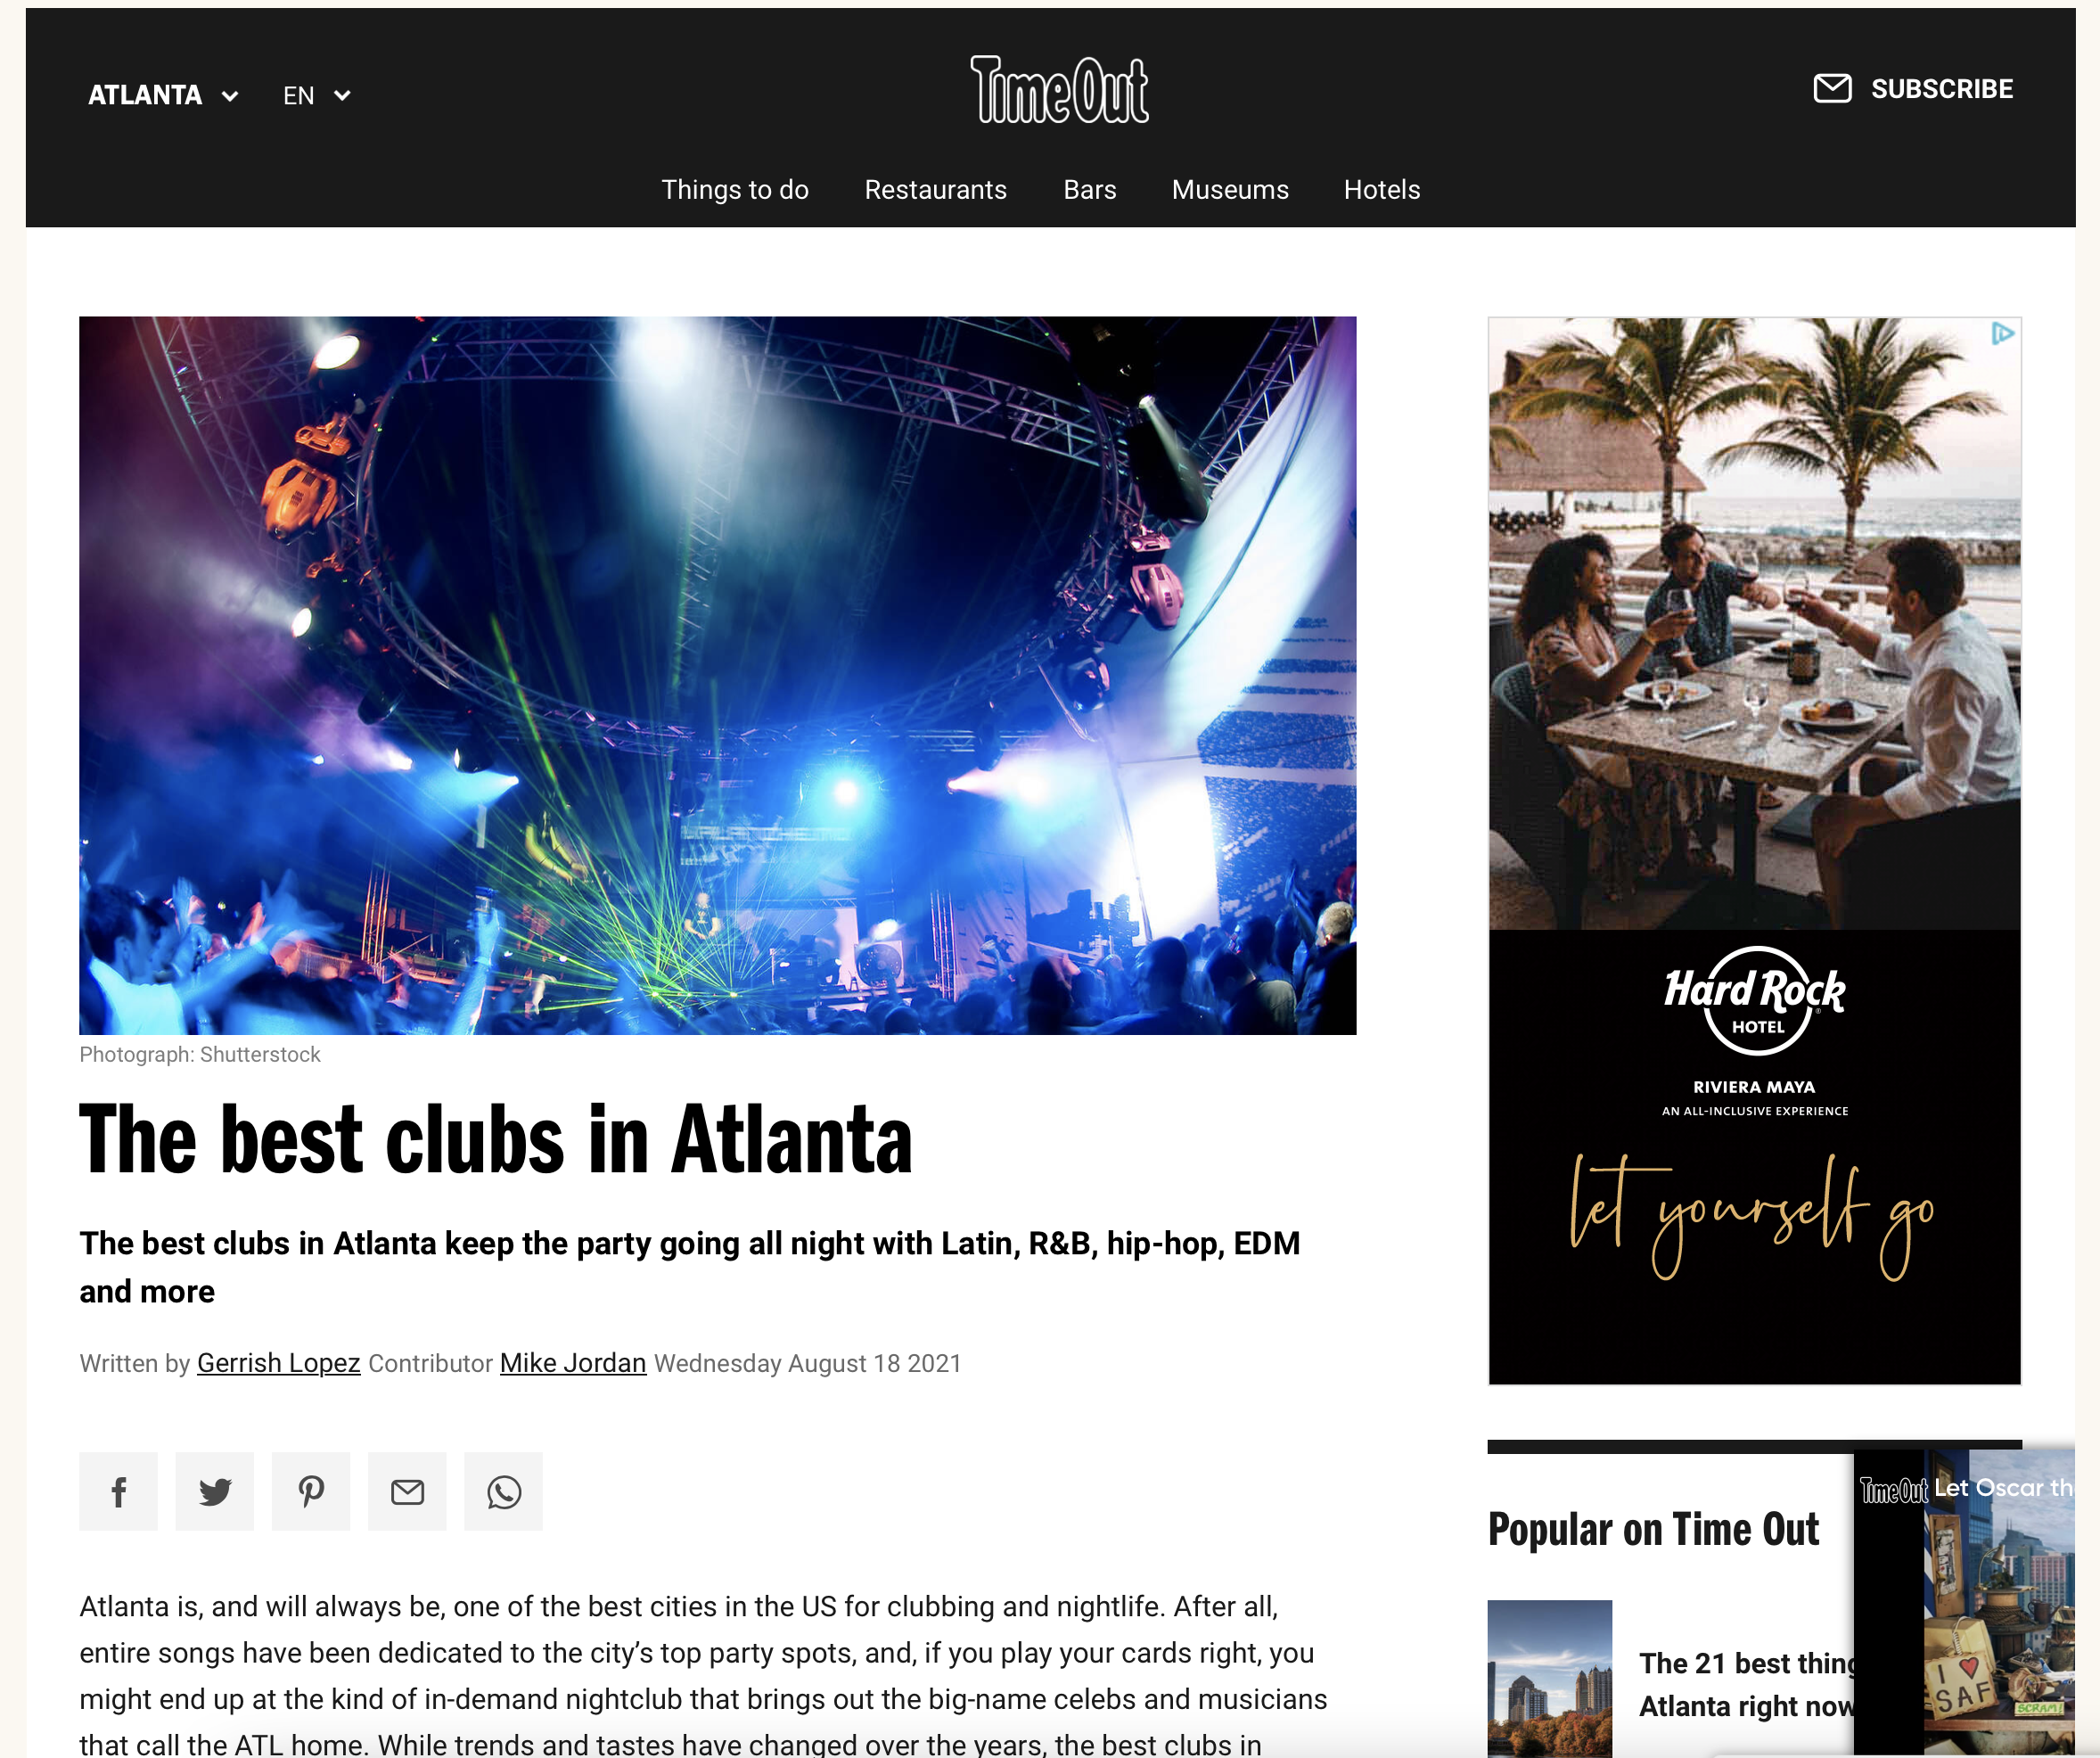 The best clubs in Atlanta